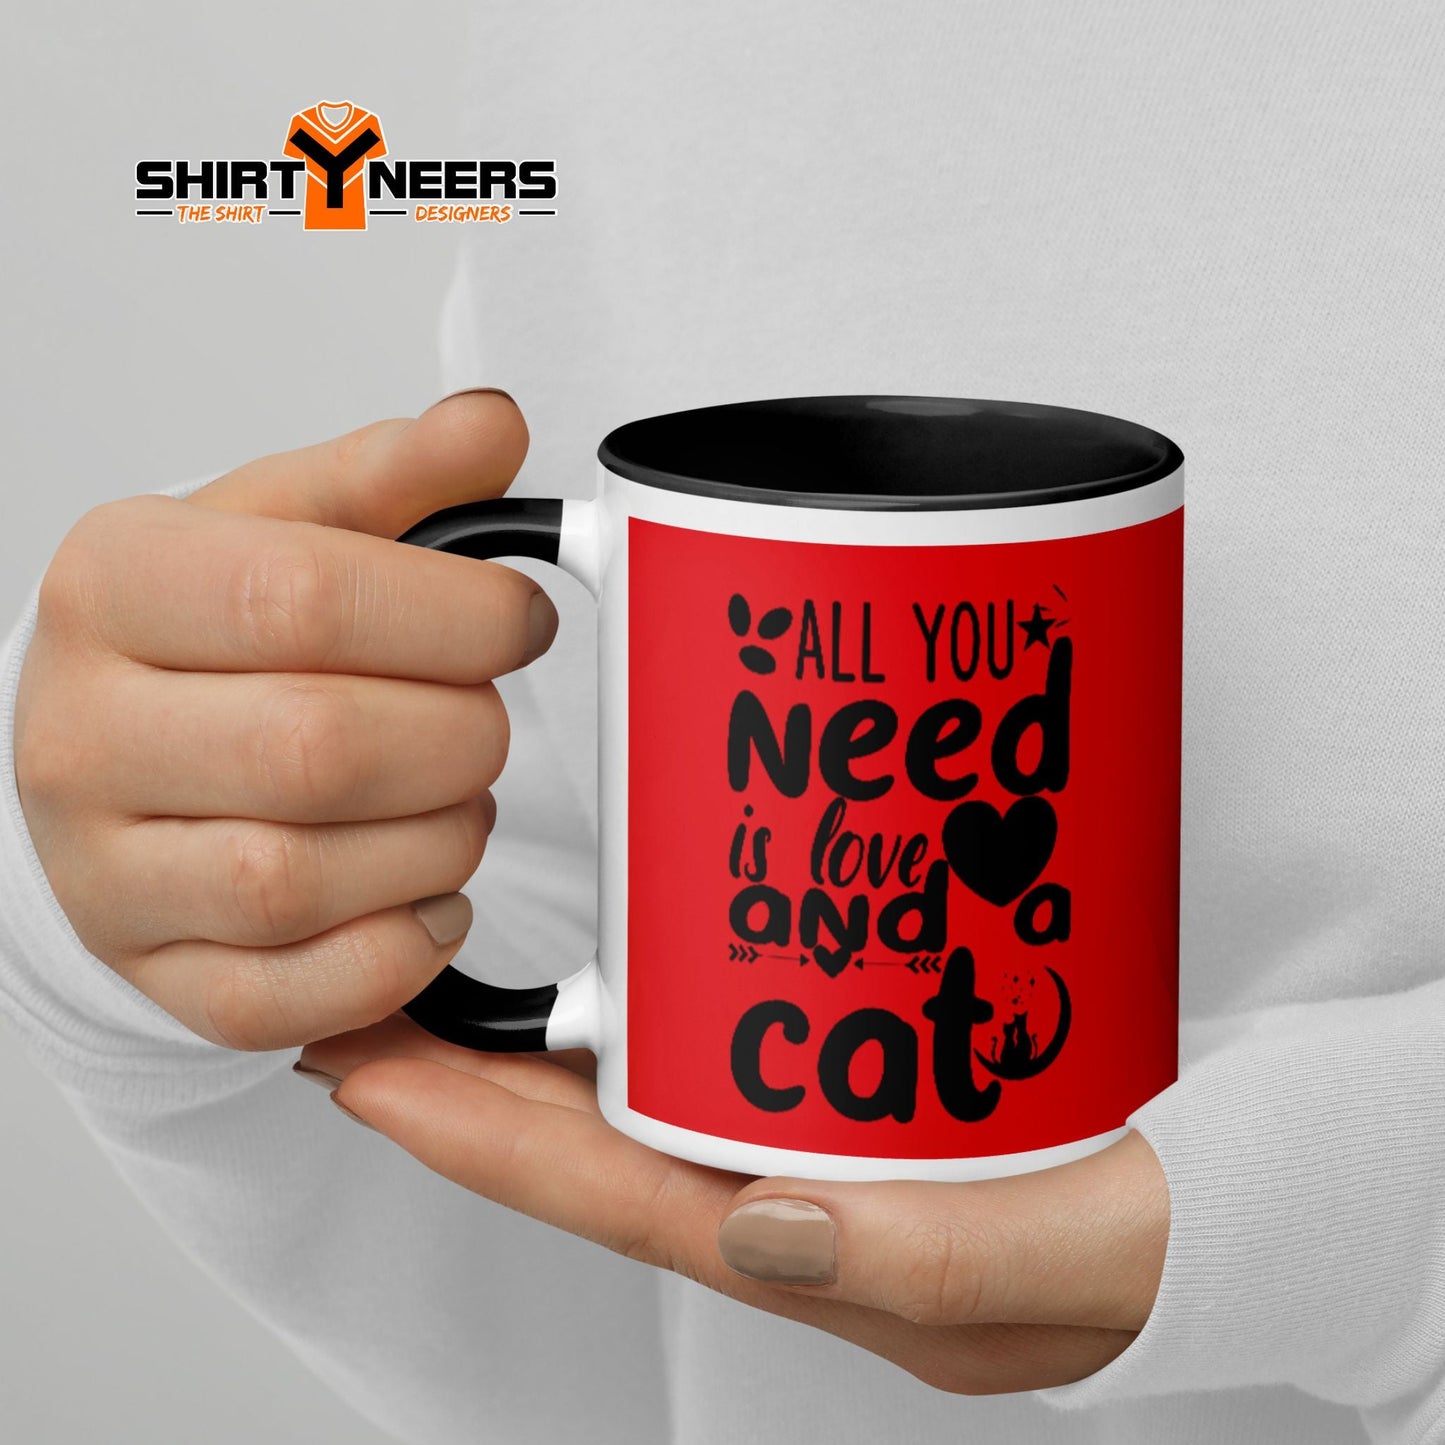 All you need is love and a cat – Tasse mit Aufdruck - Rot /